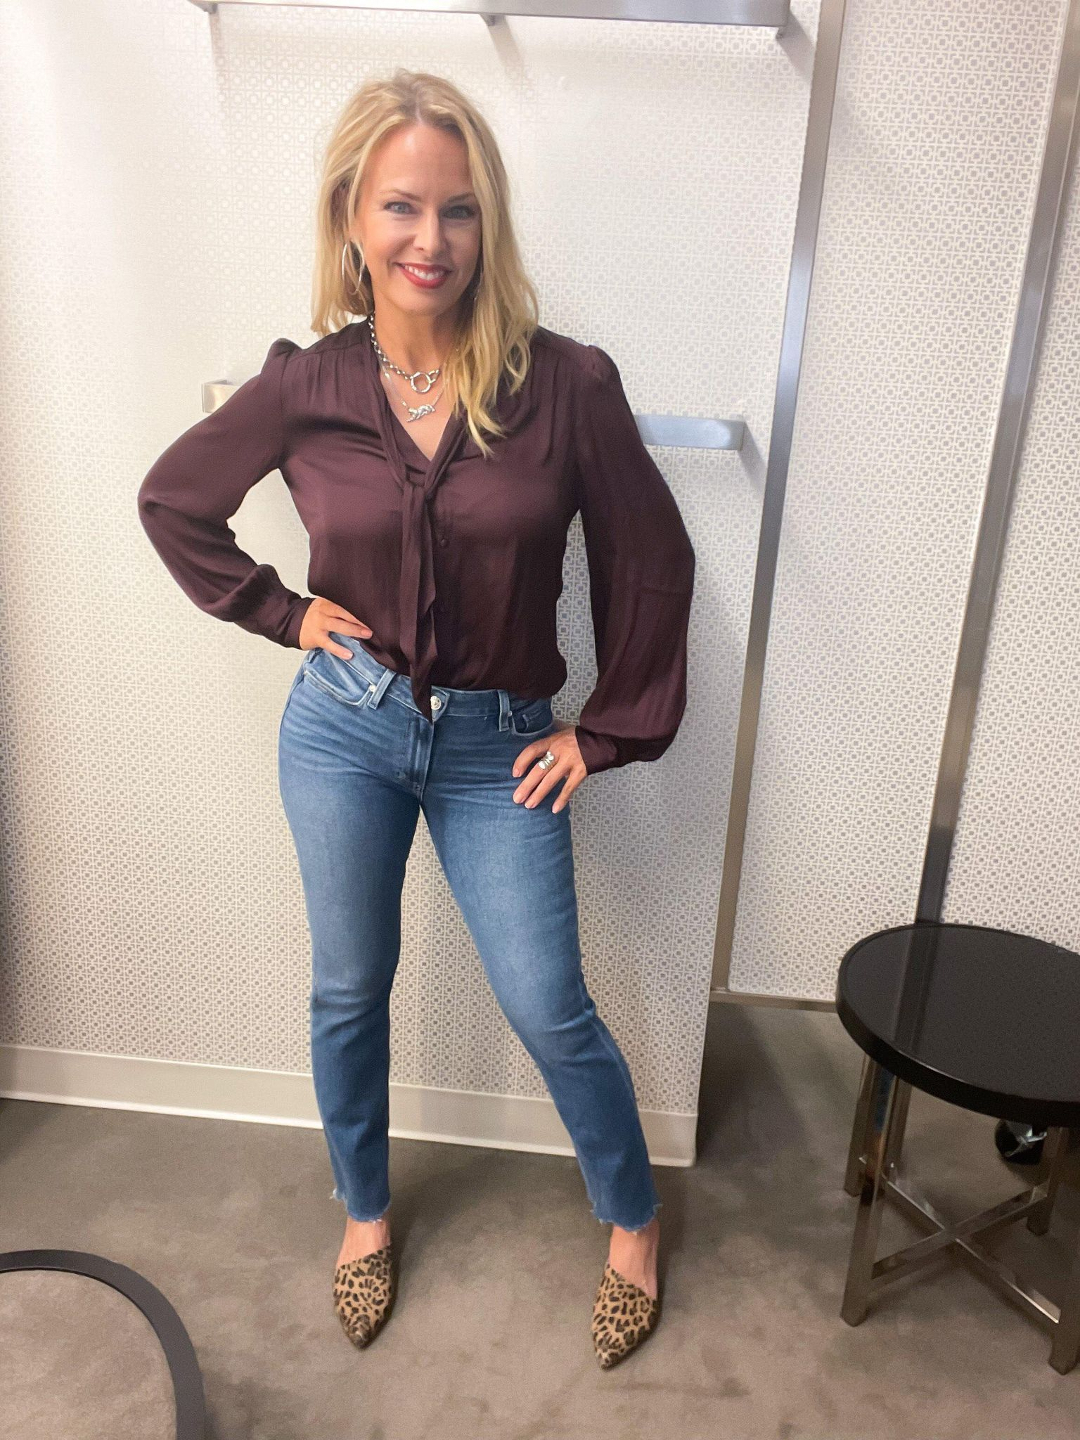 My Favorite Tops from Nordstrom Anniversary - InStyle with Stacey